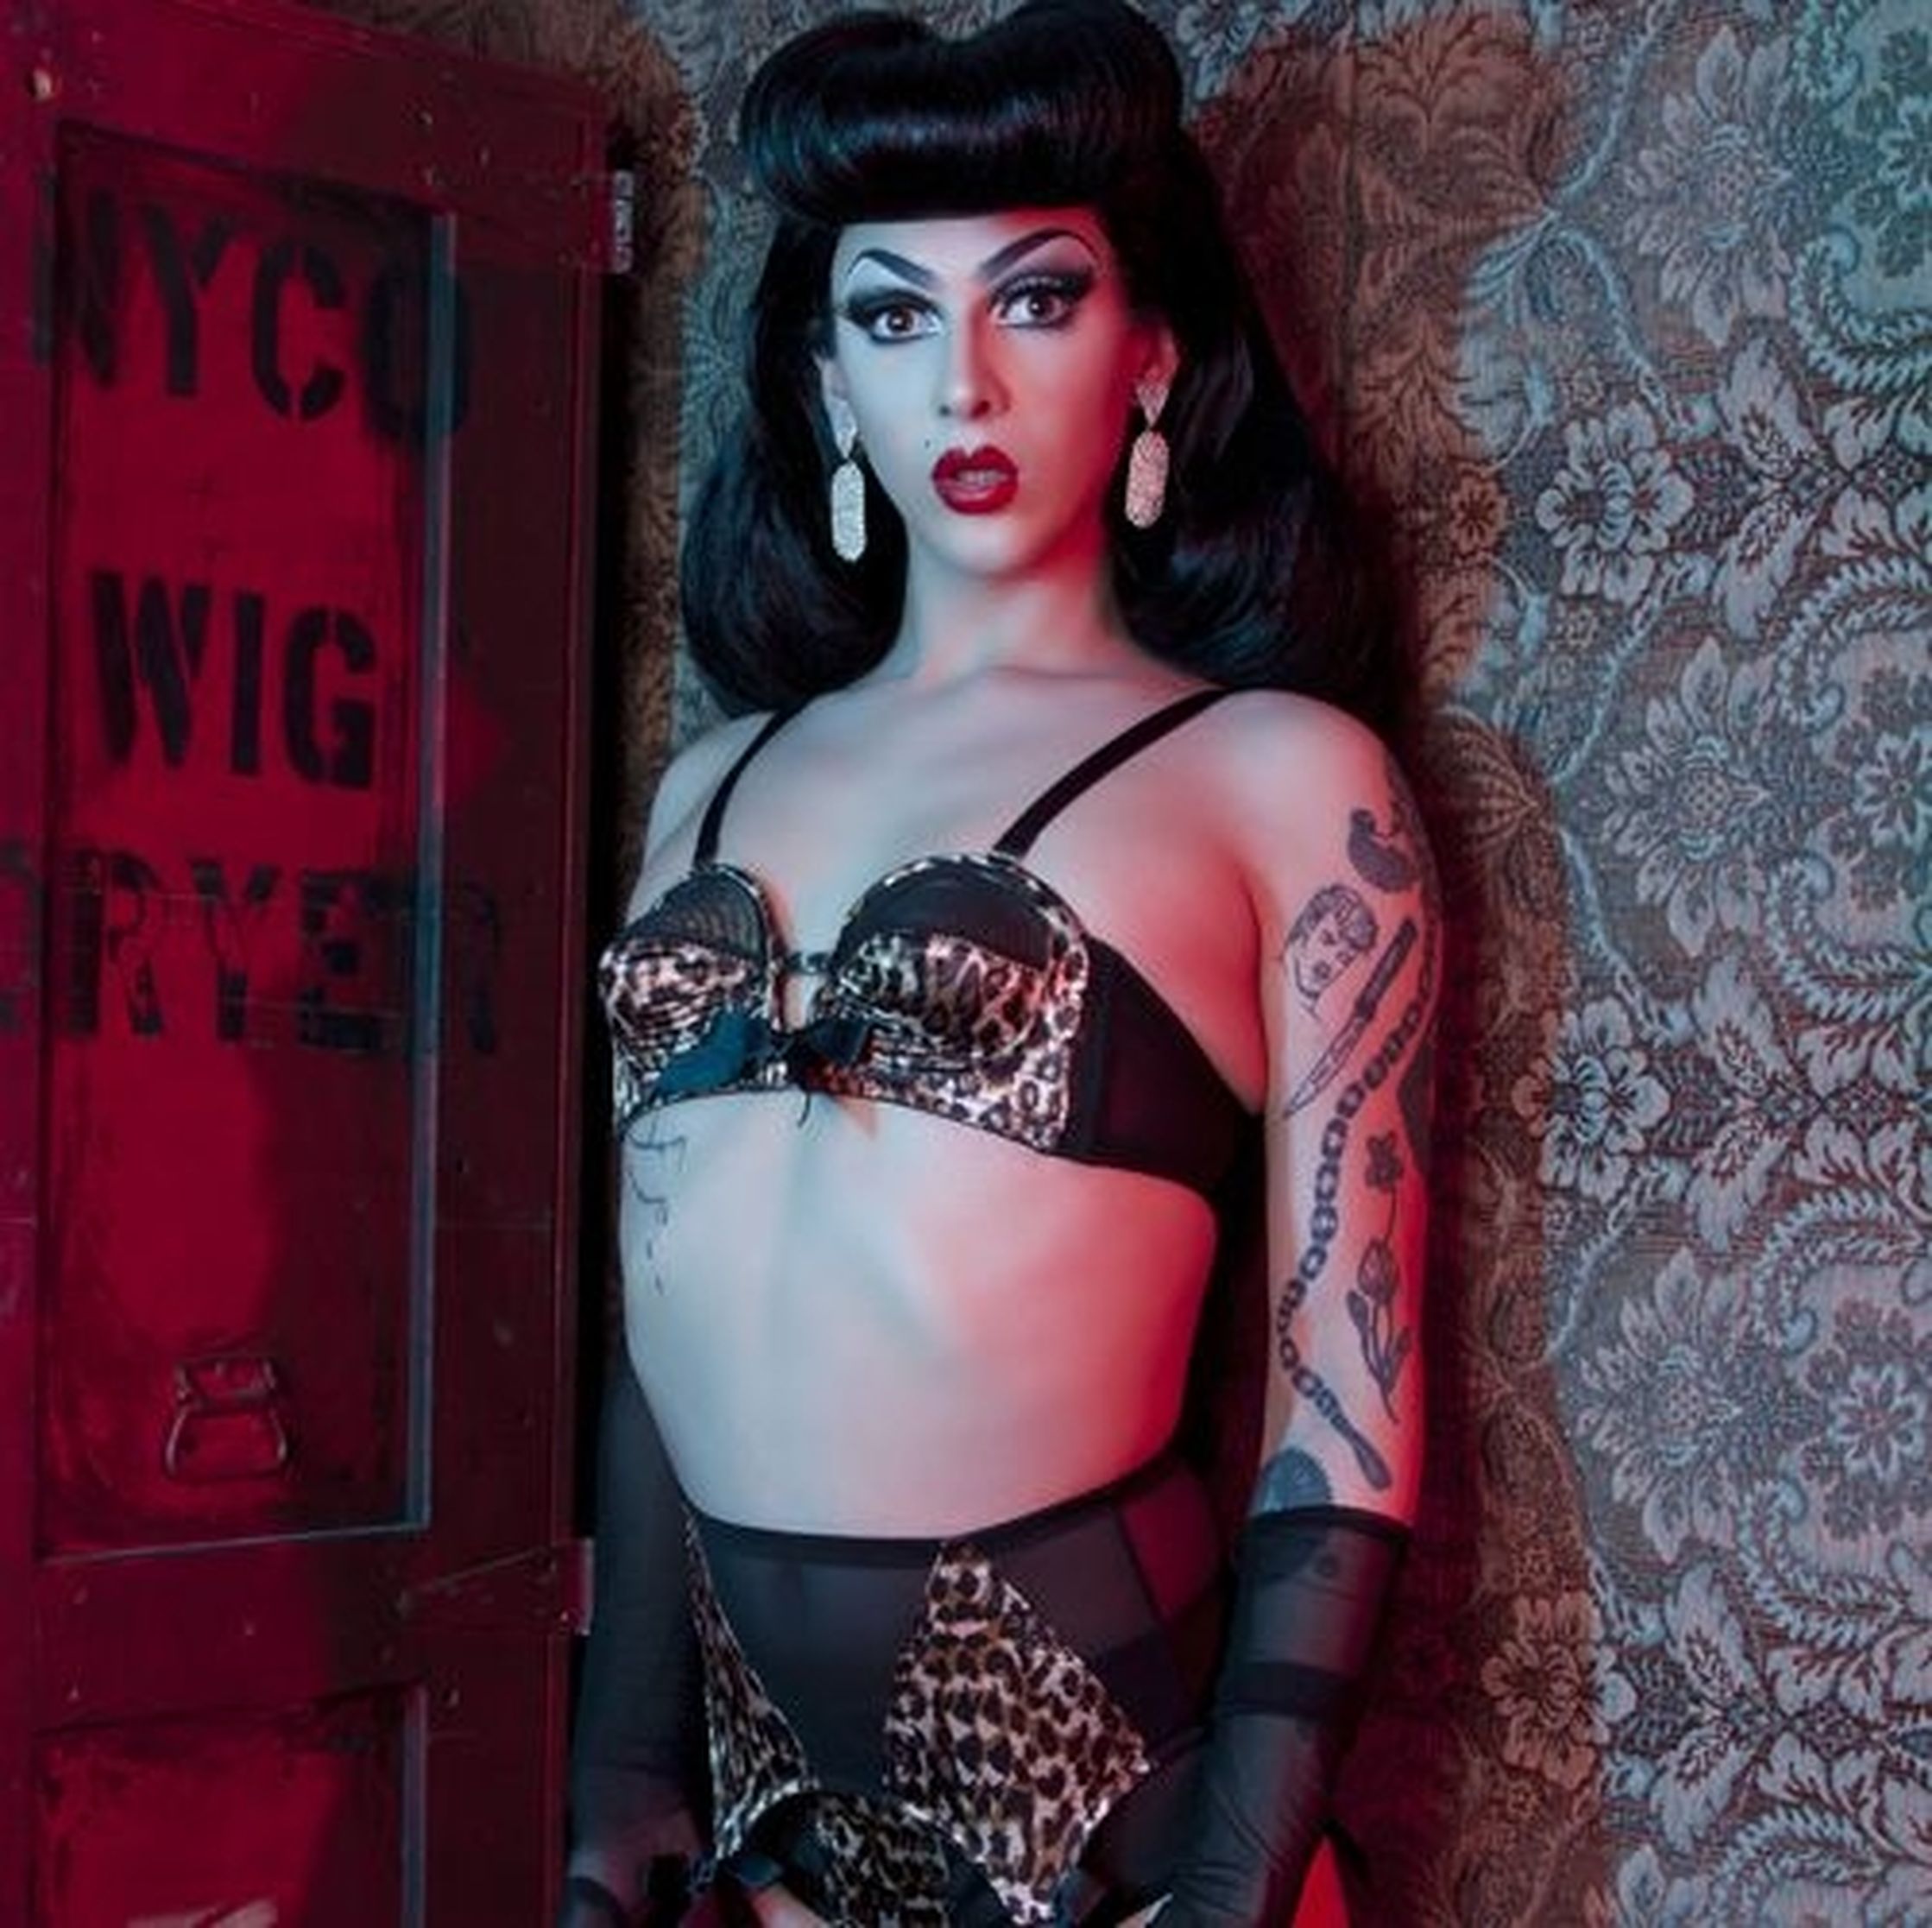 Violet Chachki becomes the first Drag Queen